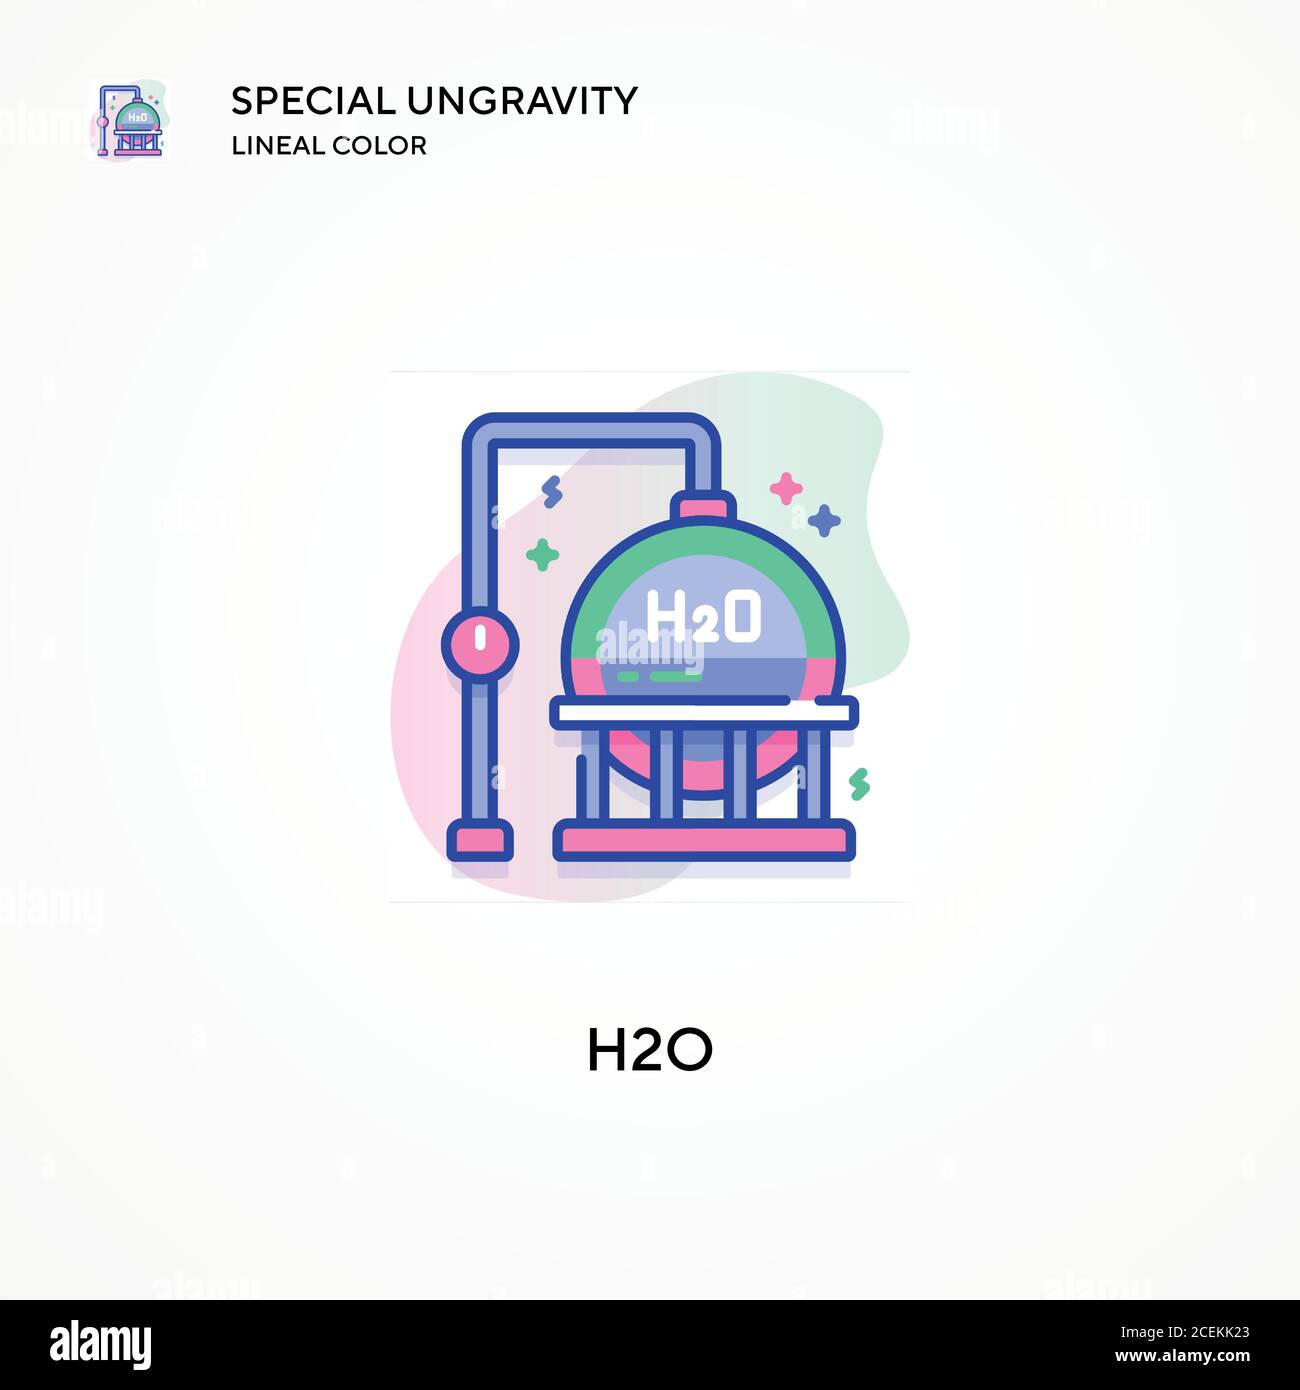 H2o special ungravity lineal color icon. Modern vector illustration concepts. Easy to edit and customize. Stock Vector